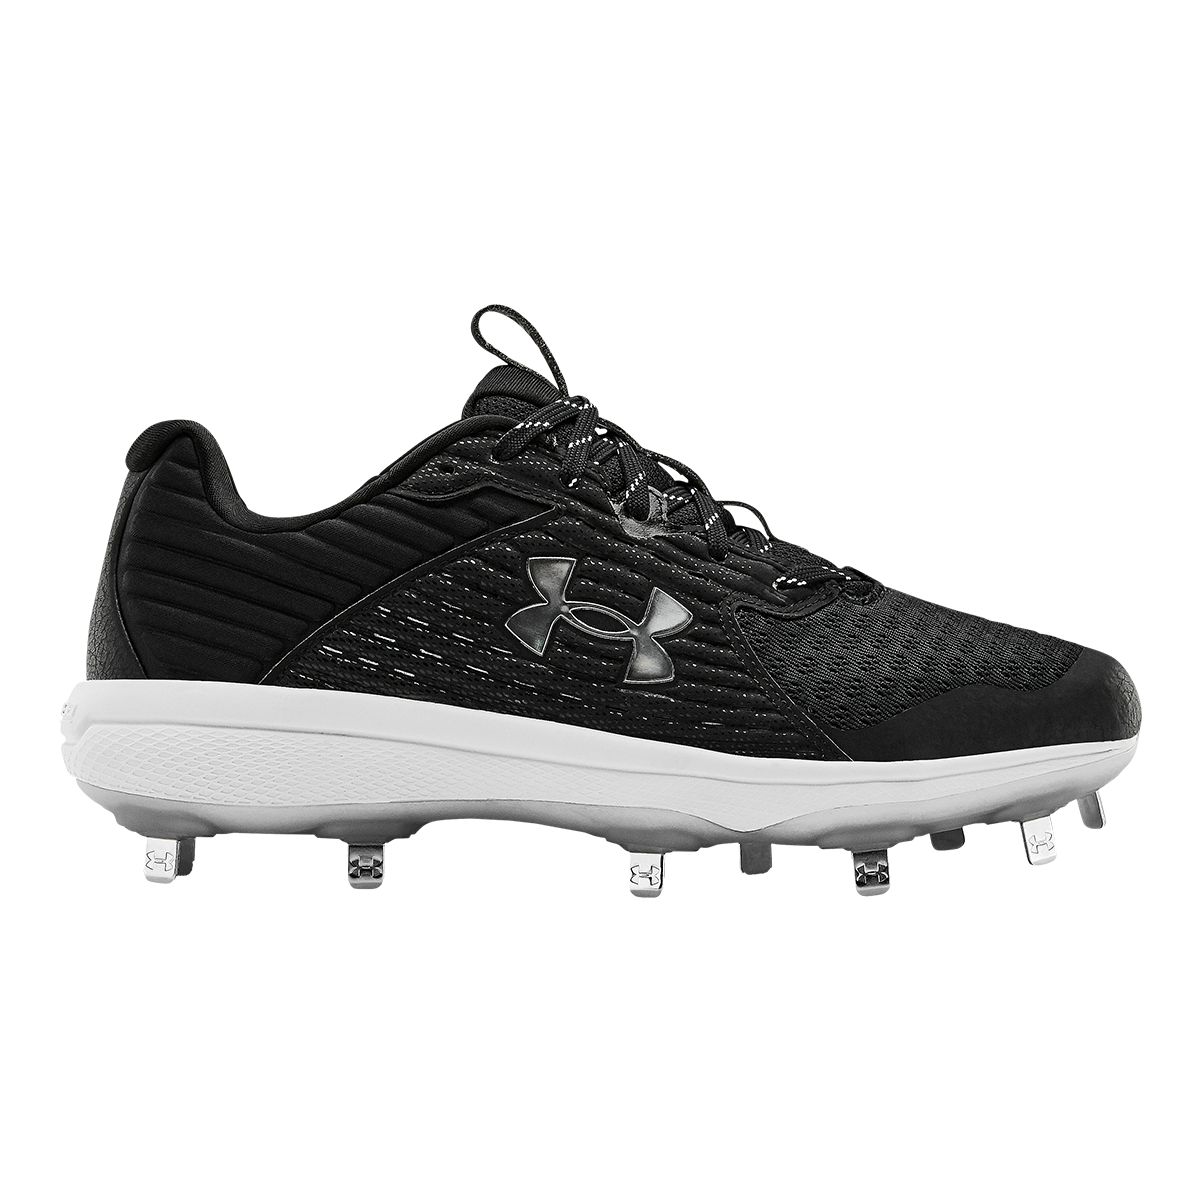 Under Armour Men's Yard Metal Baseball Shoes/Cleats, Low Top, Softball